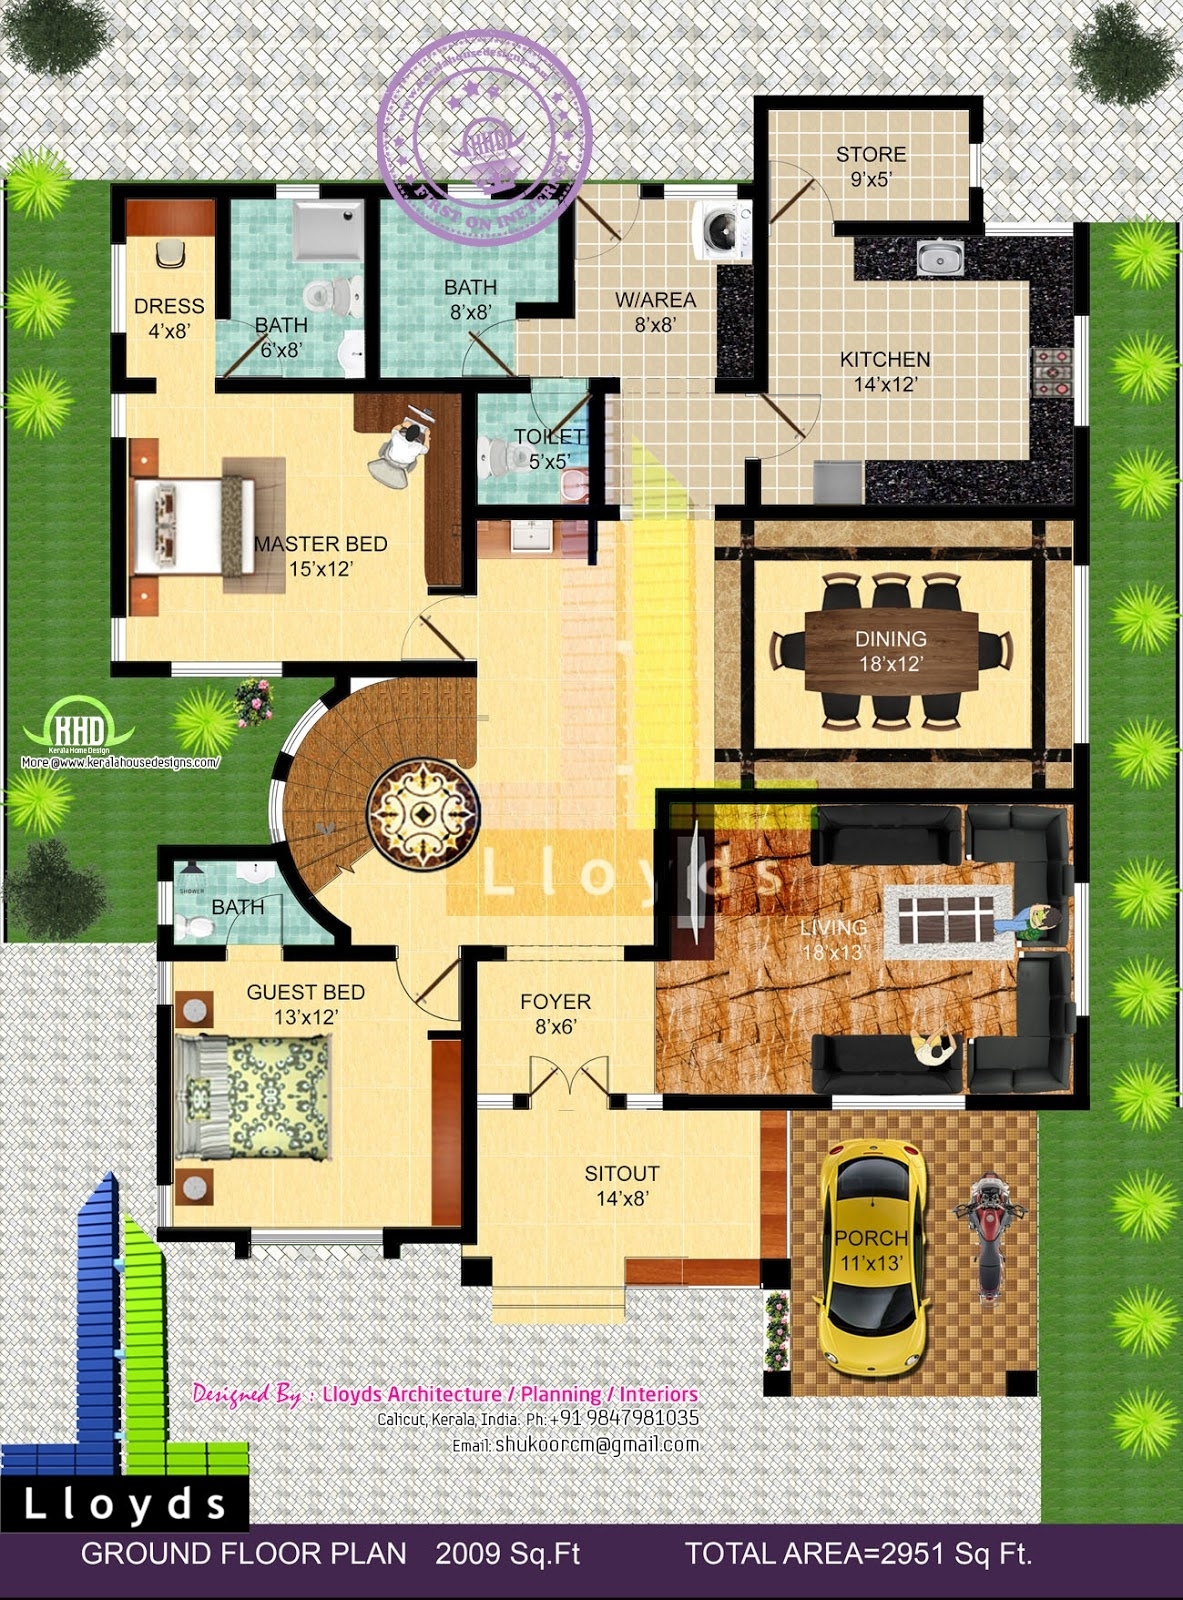 Mesmerizing 2951 sq ft 4 bedroom bungalow floor plan and 3d view | house design plans throughout good ground floor plan and elevation